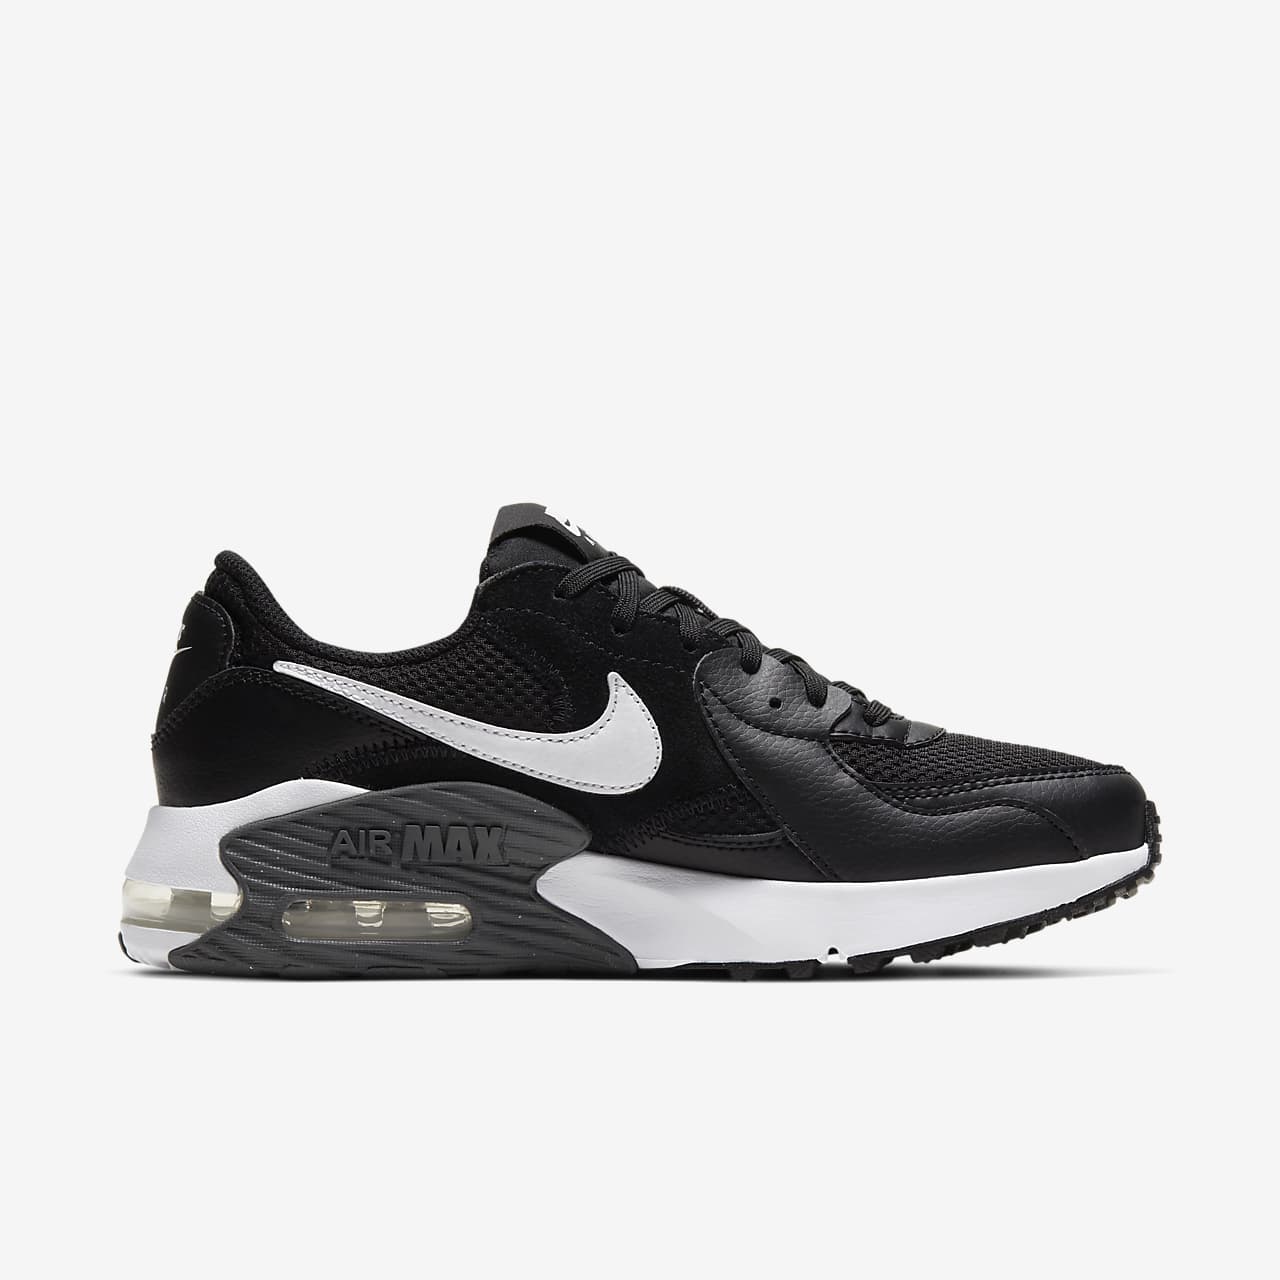 Nike Air Max Excee Women's Shoes جي سكس بي دي